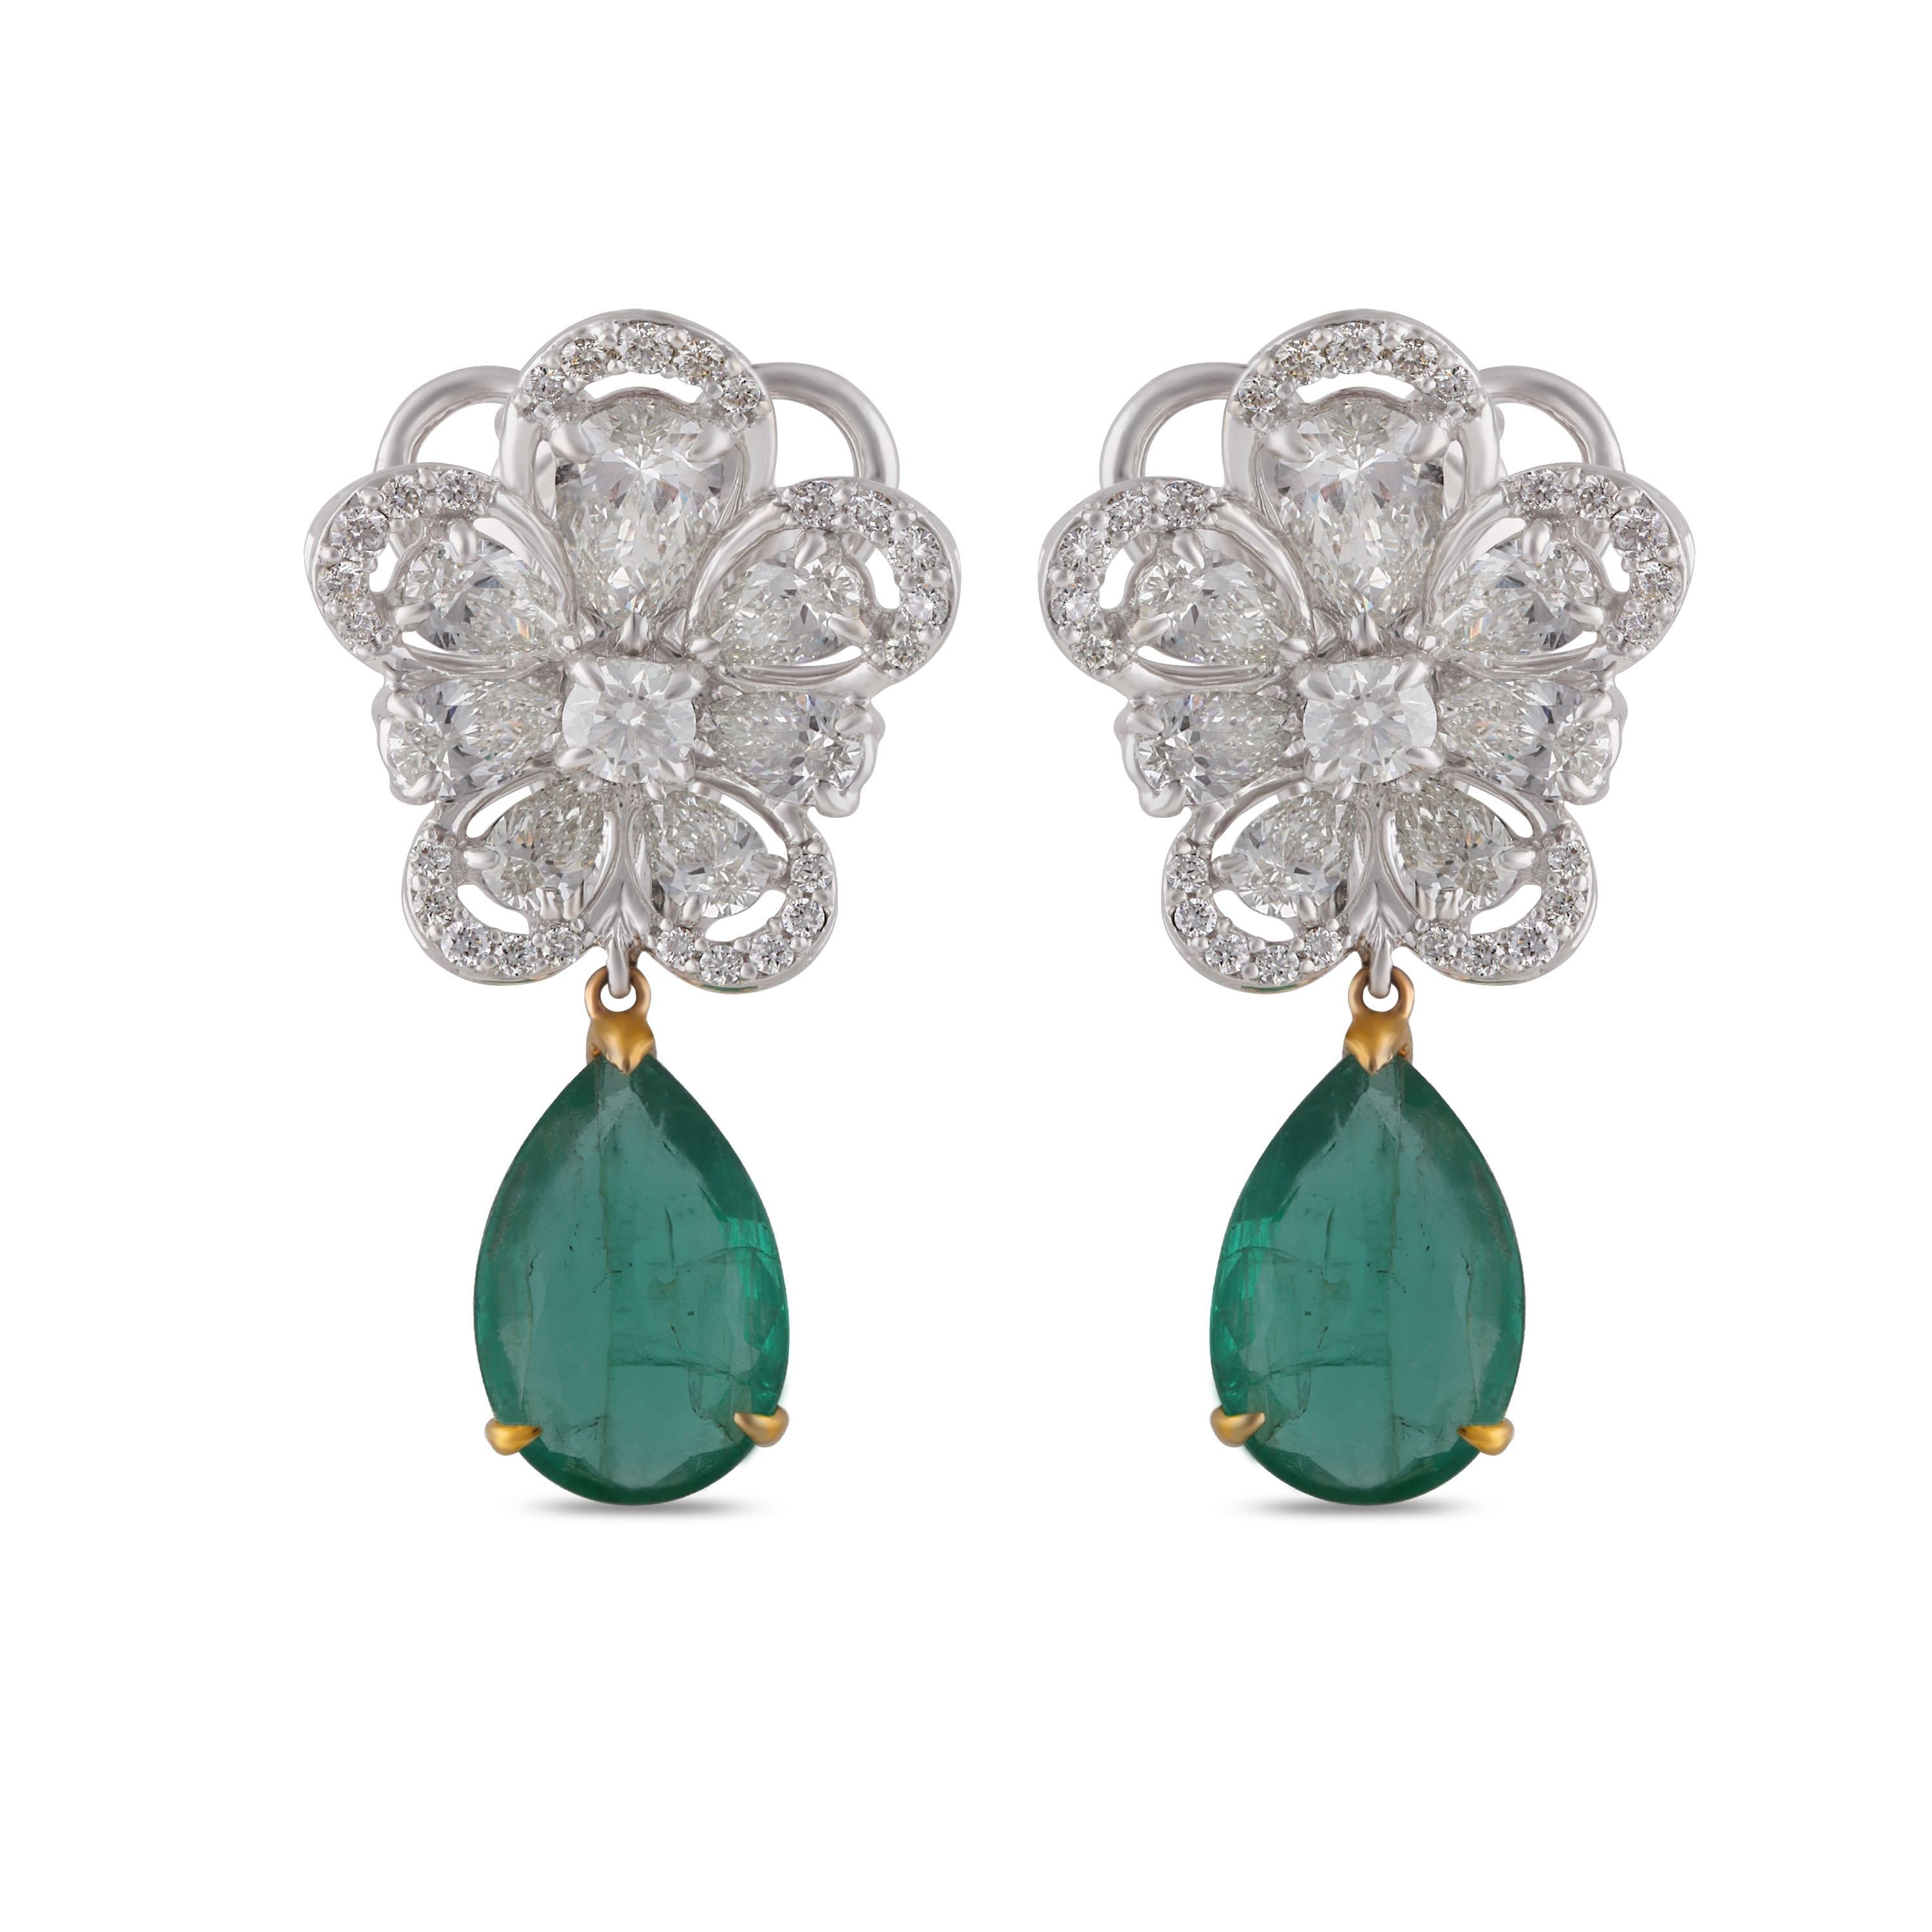 Pear Cut Studio Rêves Blossom Diamond and Emerald Drop Earrings in 18 Karat White Gold For Sale